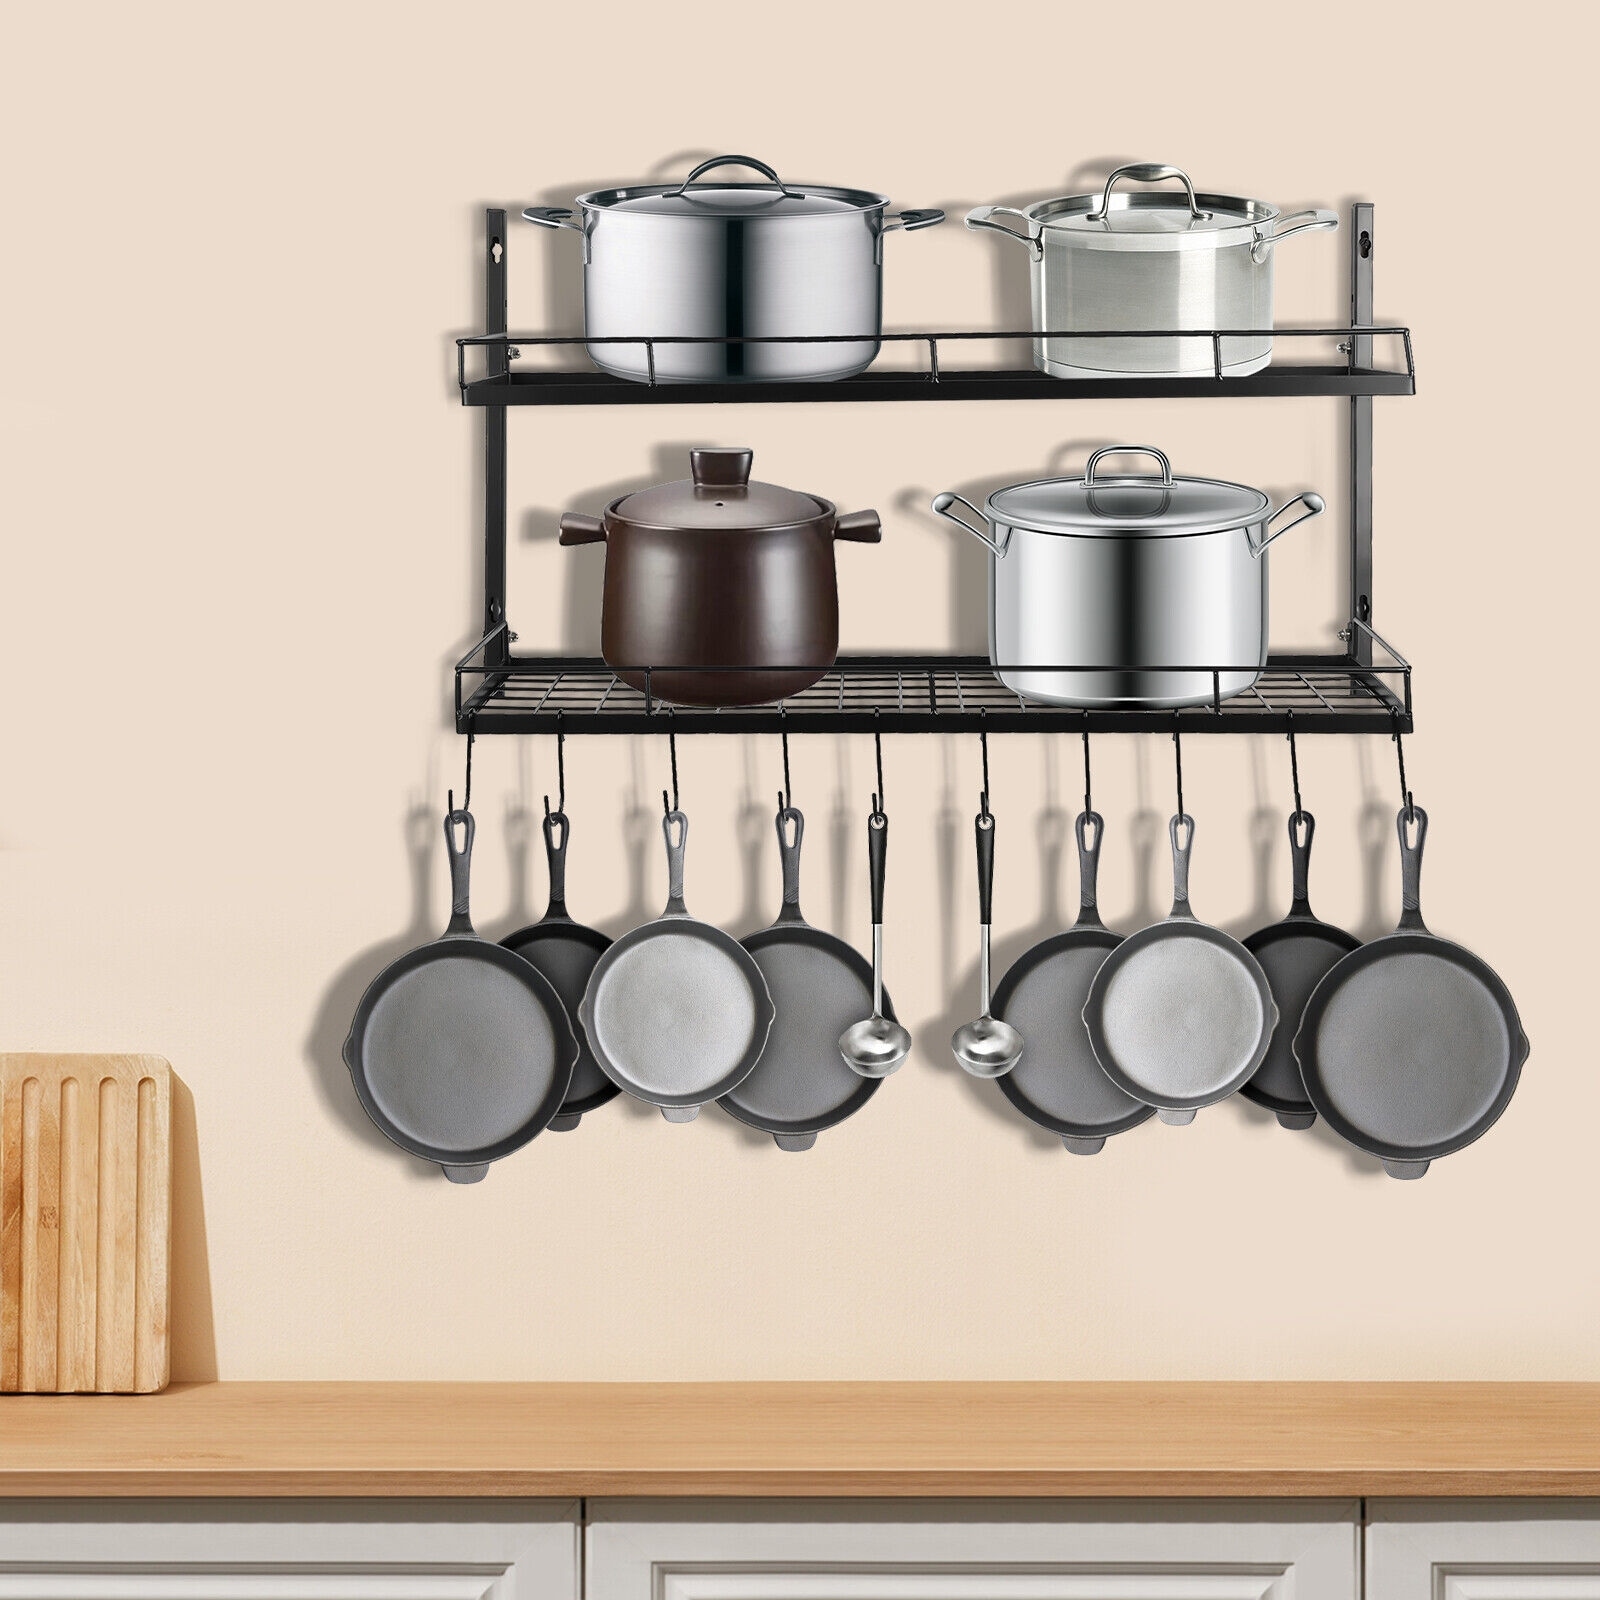 https://ak1.ostkcdn.com/images/products/is/images/direct/9efa4cf45cc2279a064048c903a08933b5c87afe/Kitchen-Wall-Mounted-2-Tiers-Pot-Pan-Rack-with-10-Hooks.jpg